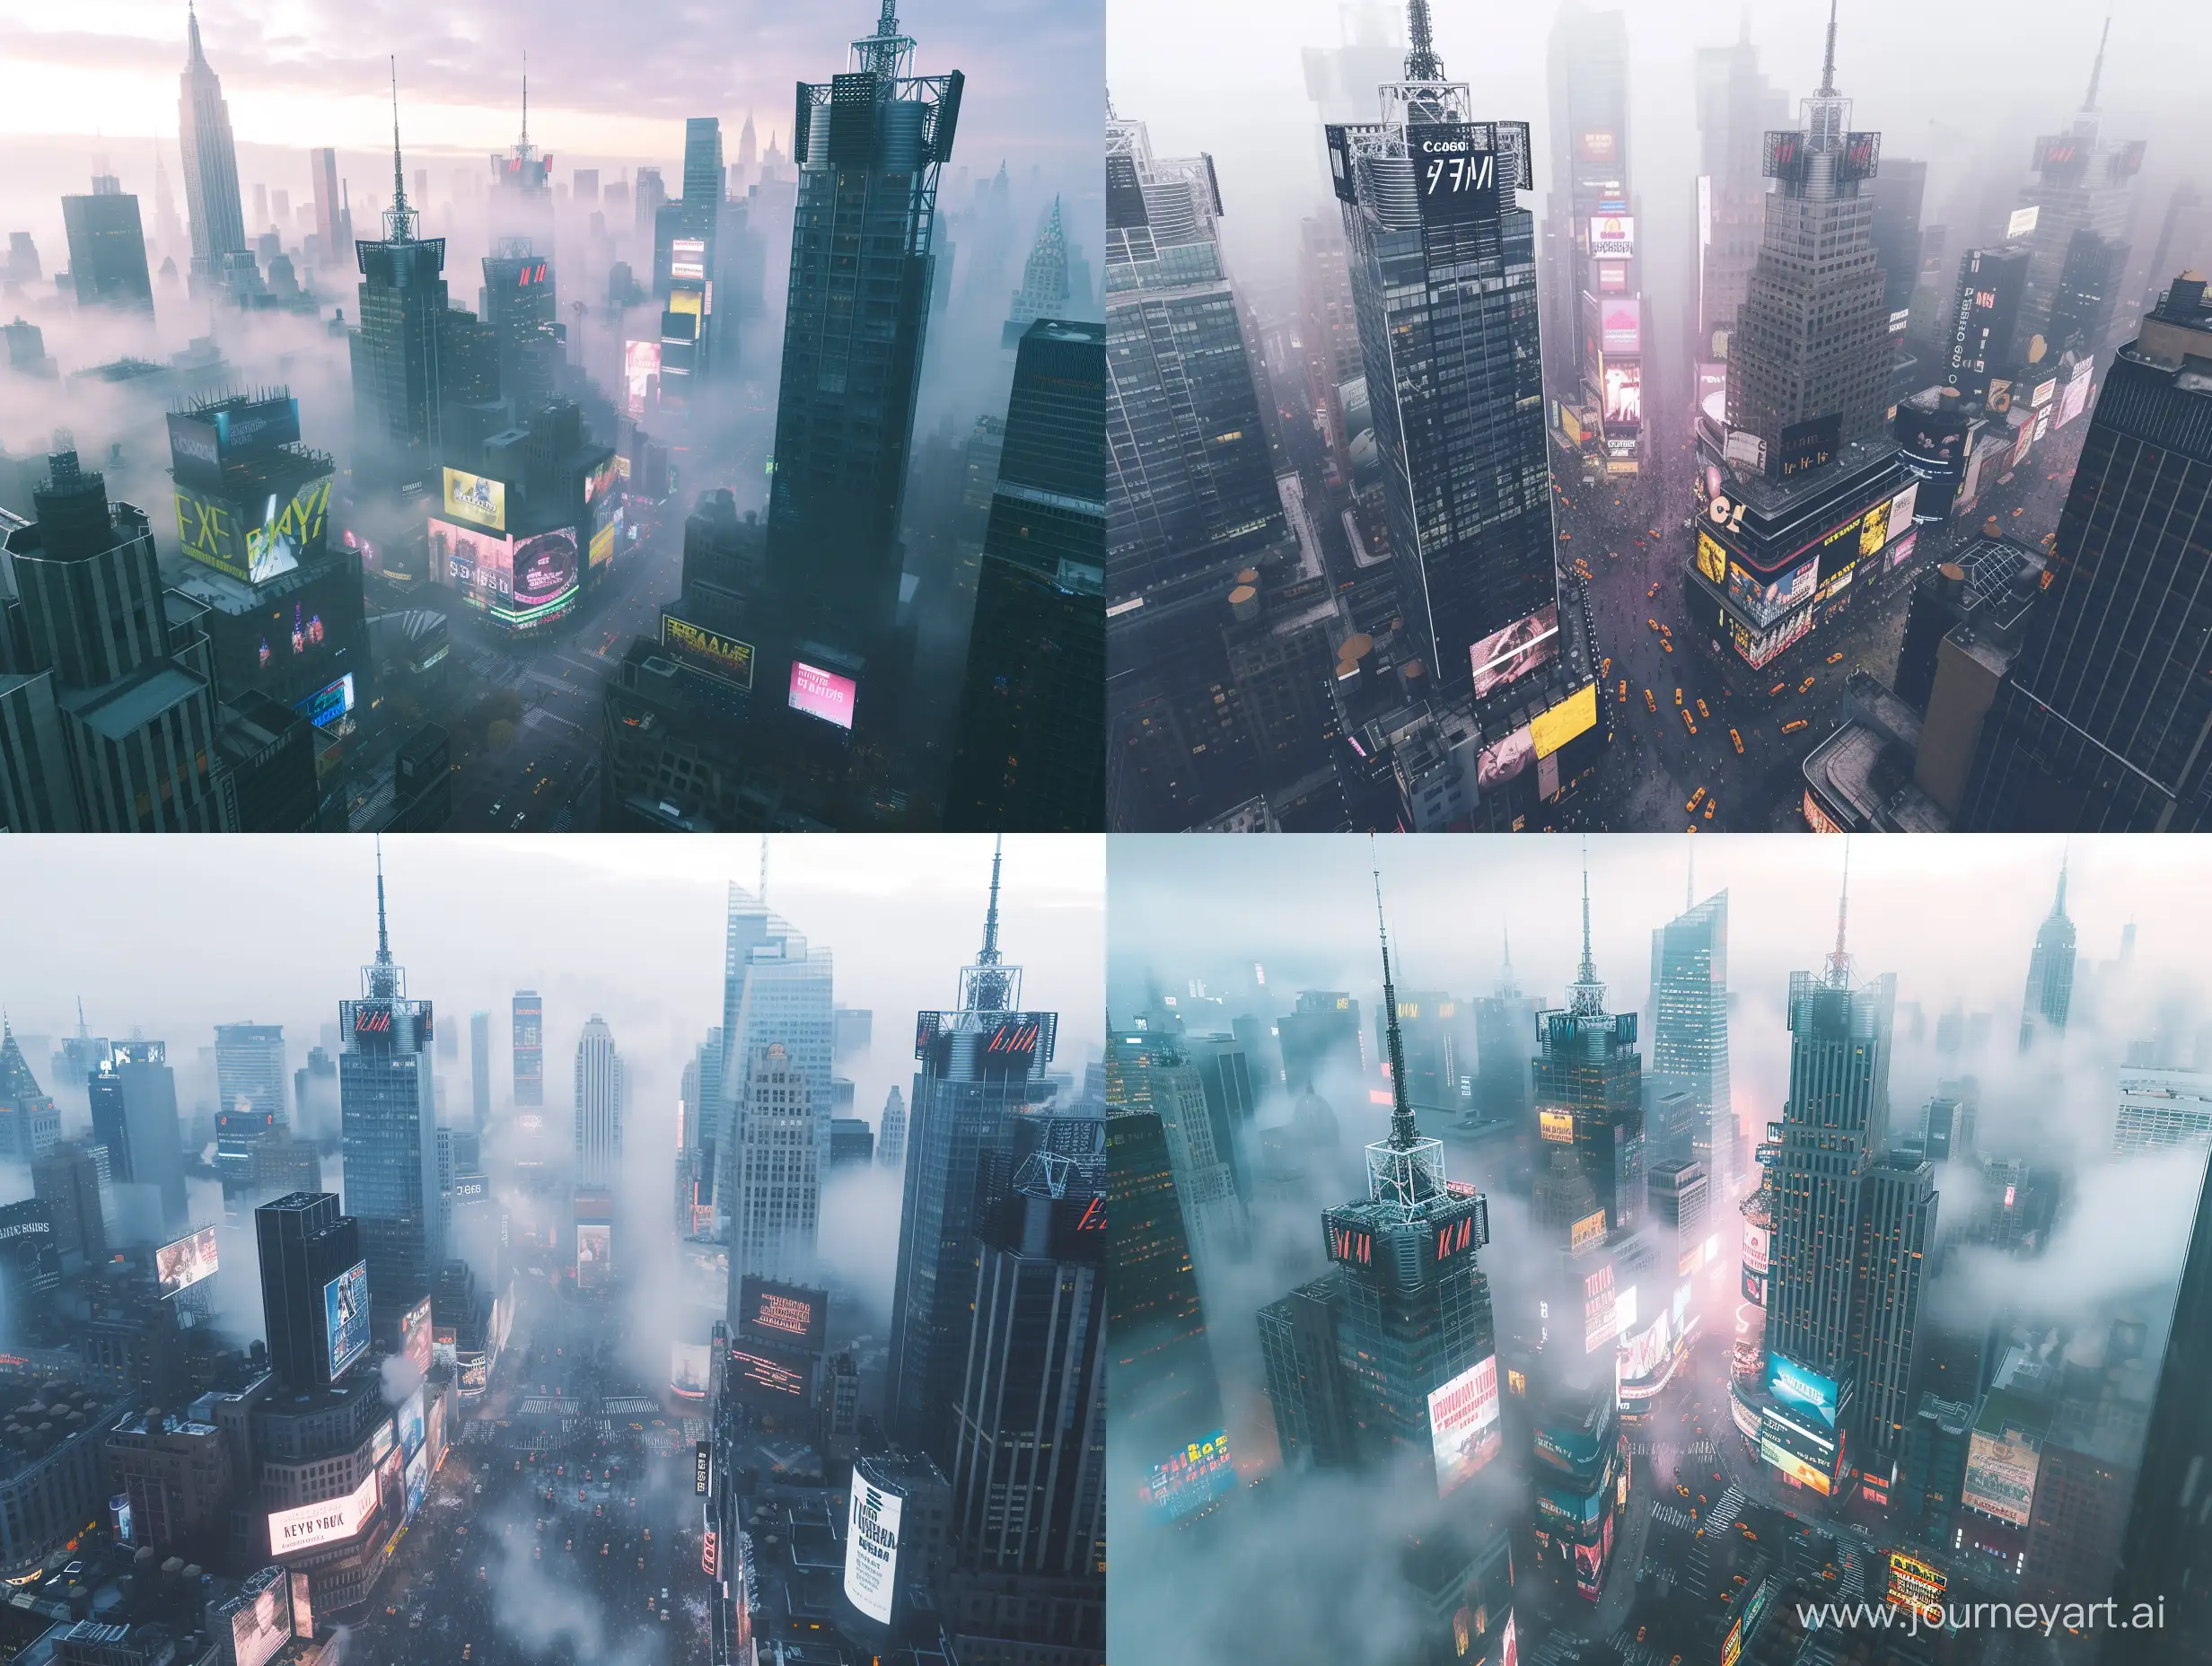 a bustling Procedural new york cityscape, the photo is bathed in natural lighting, relaxing setting. Shot in 4k with a high end DSLR camera. such as a Canon EOS R5 with a 50mm f/1. 2 lens, architecture, drone view, skyline, vivid, foggy, dystopian, science fiction, full view, skyline, billboards, nature, 
